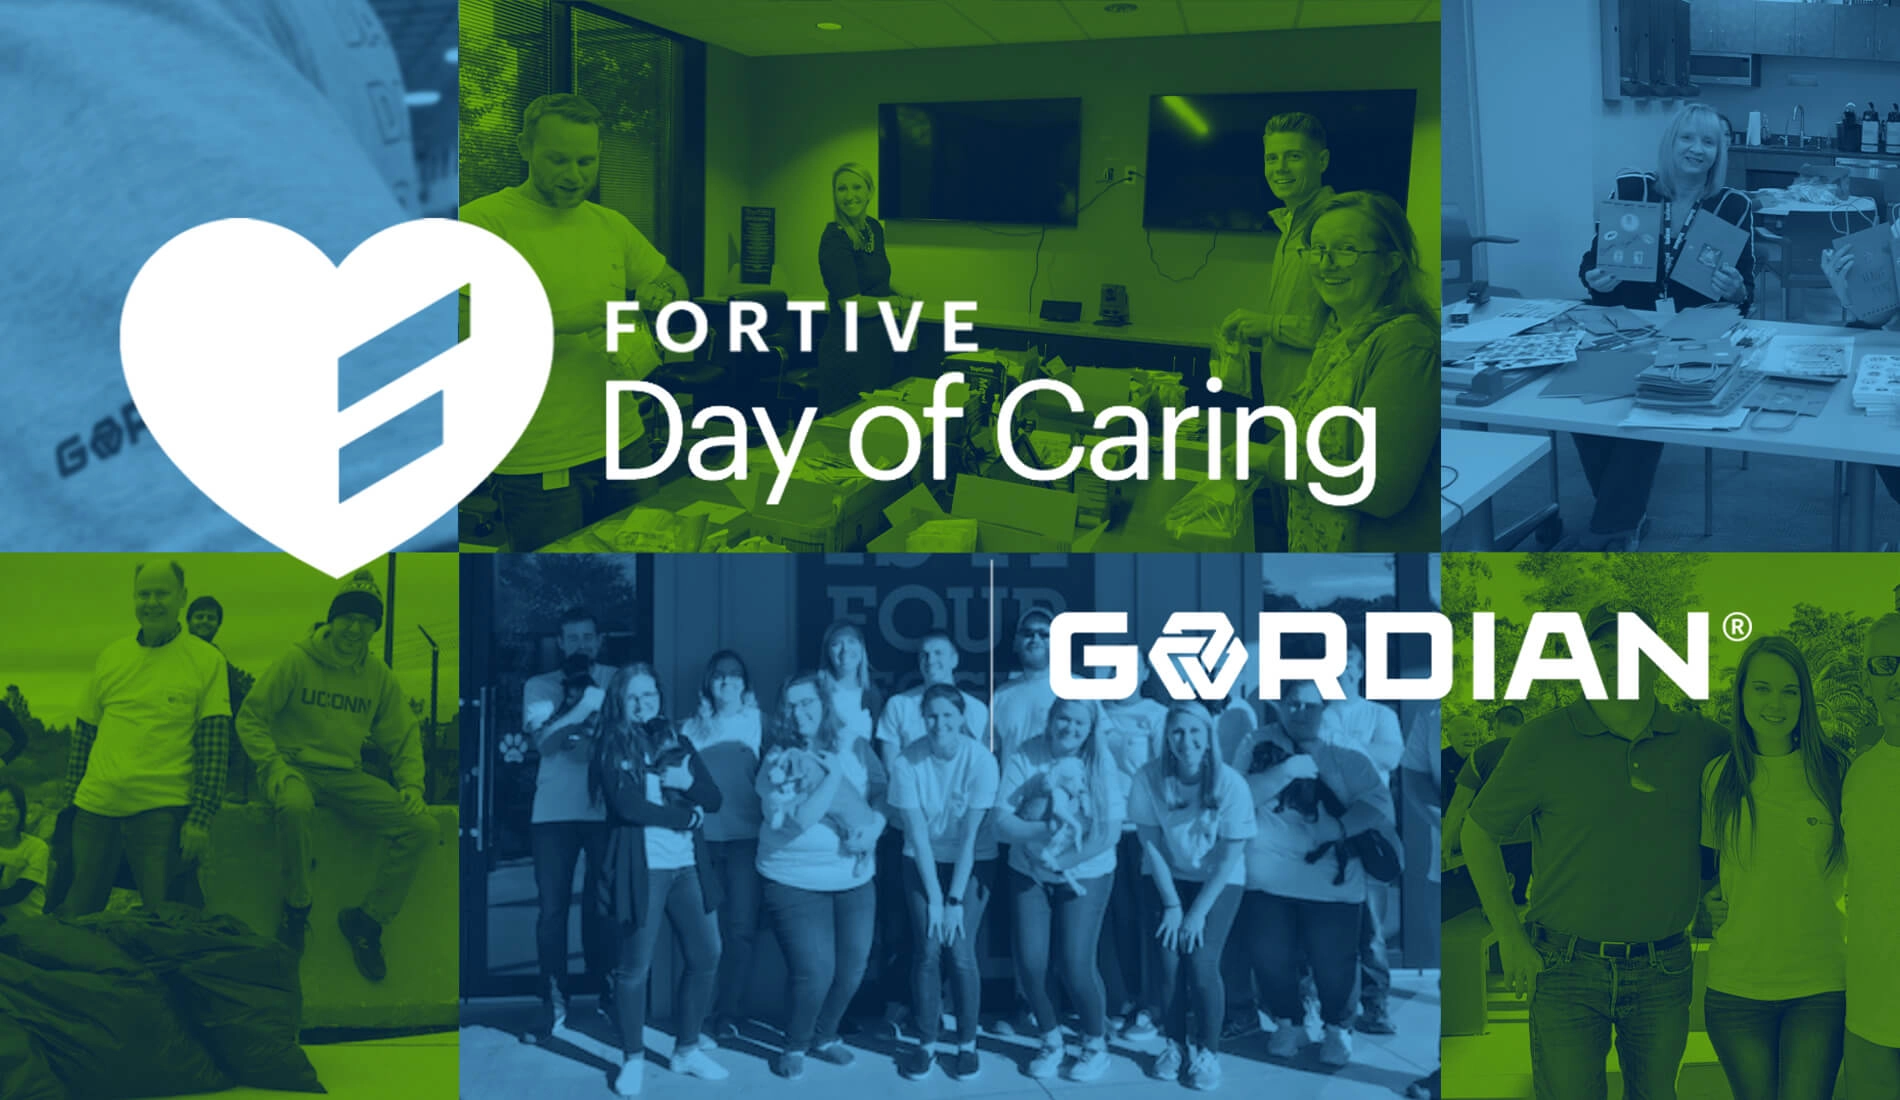 Gordian Gives During Fortive Day of Caring